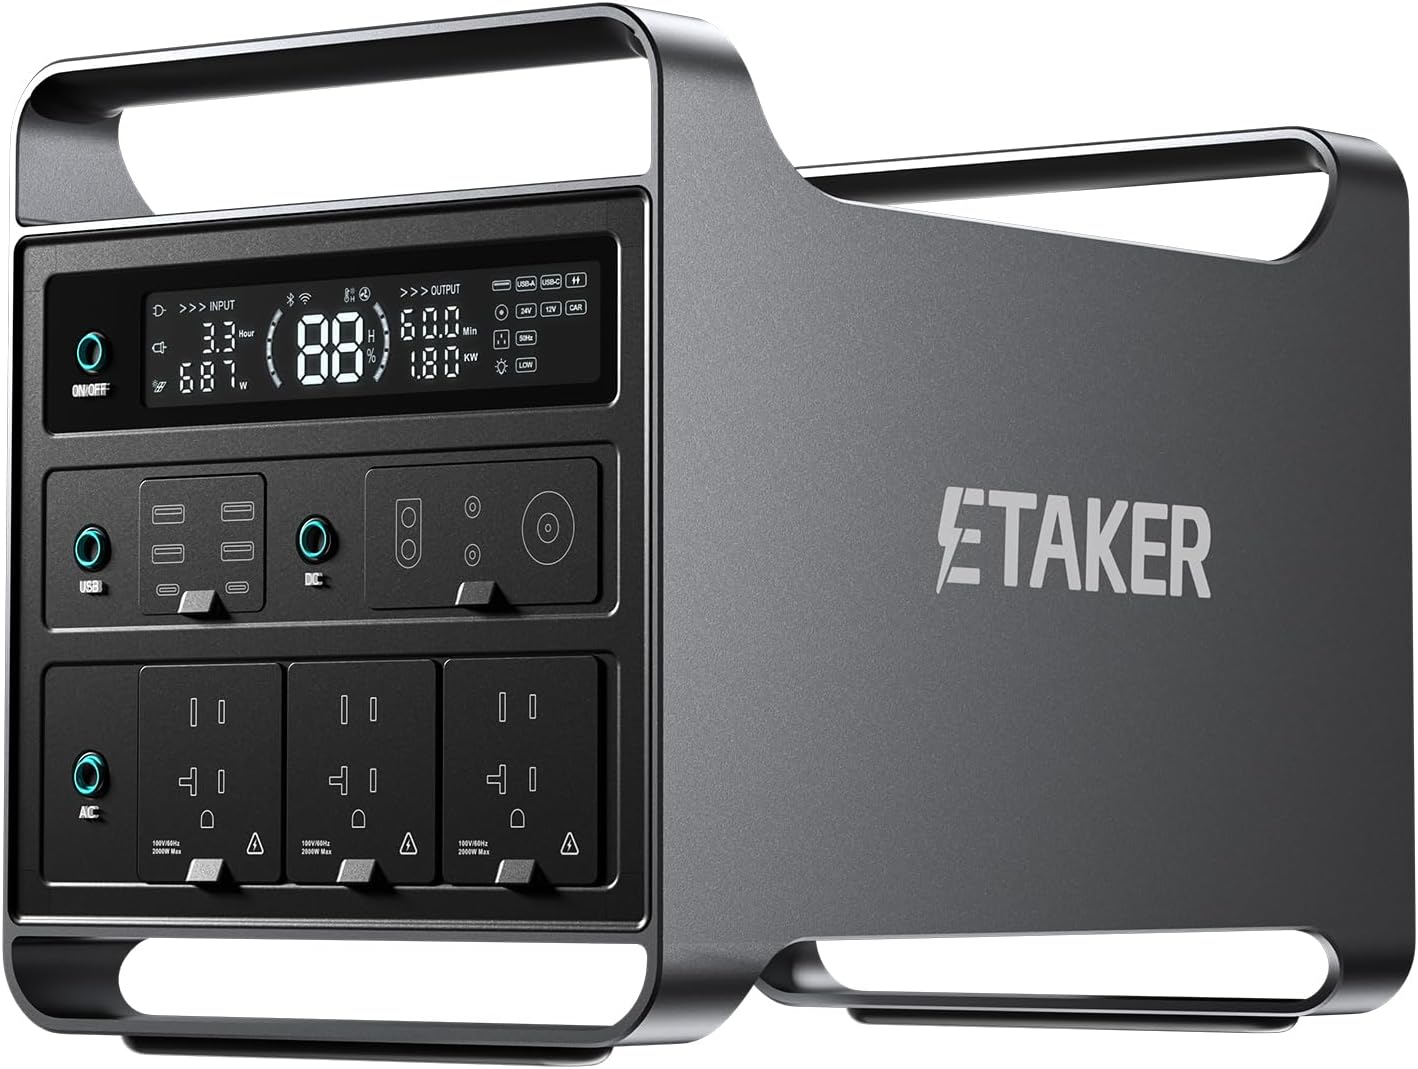 ETaker Portable Power Station M2000, 2008Wh Capacity with 6 AC Ports,4 USB-A & 2 USB-C Outlets, Fast Charging, Solar Generator Expandable for Home Backup, Emergency, Outdoor, RV Travel